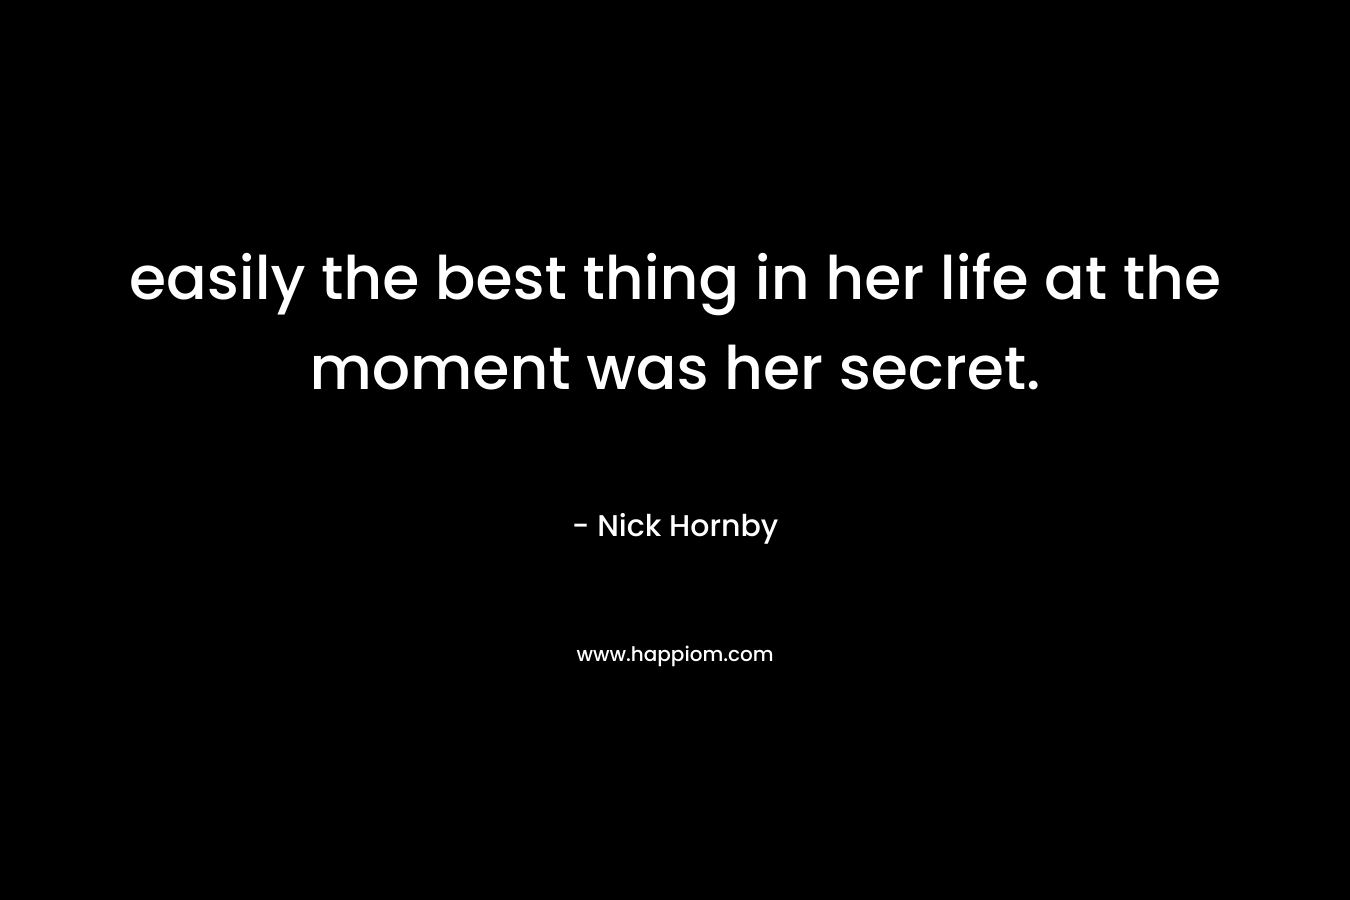 easily the best thing in her life at the moment was her secret.